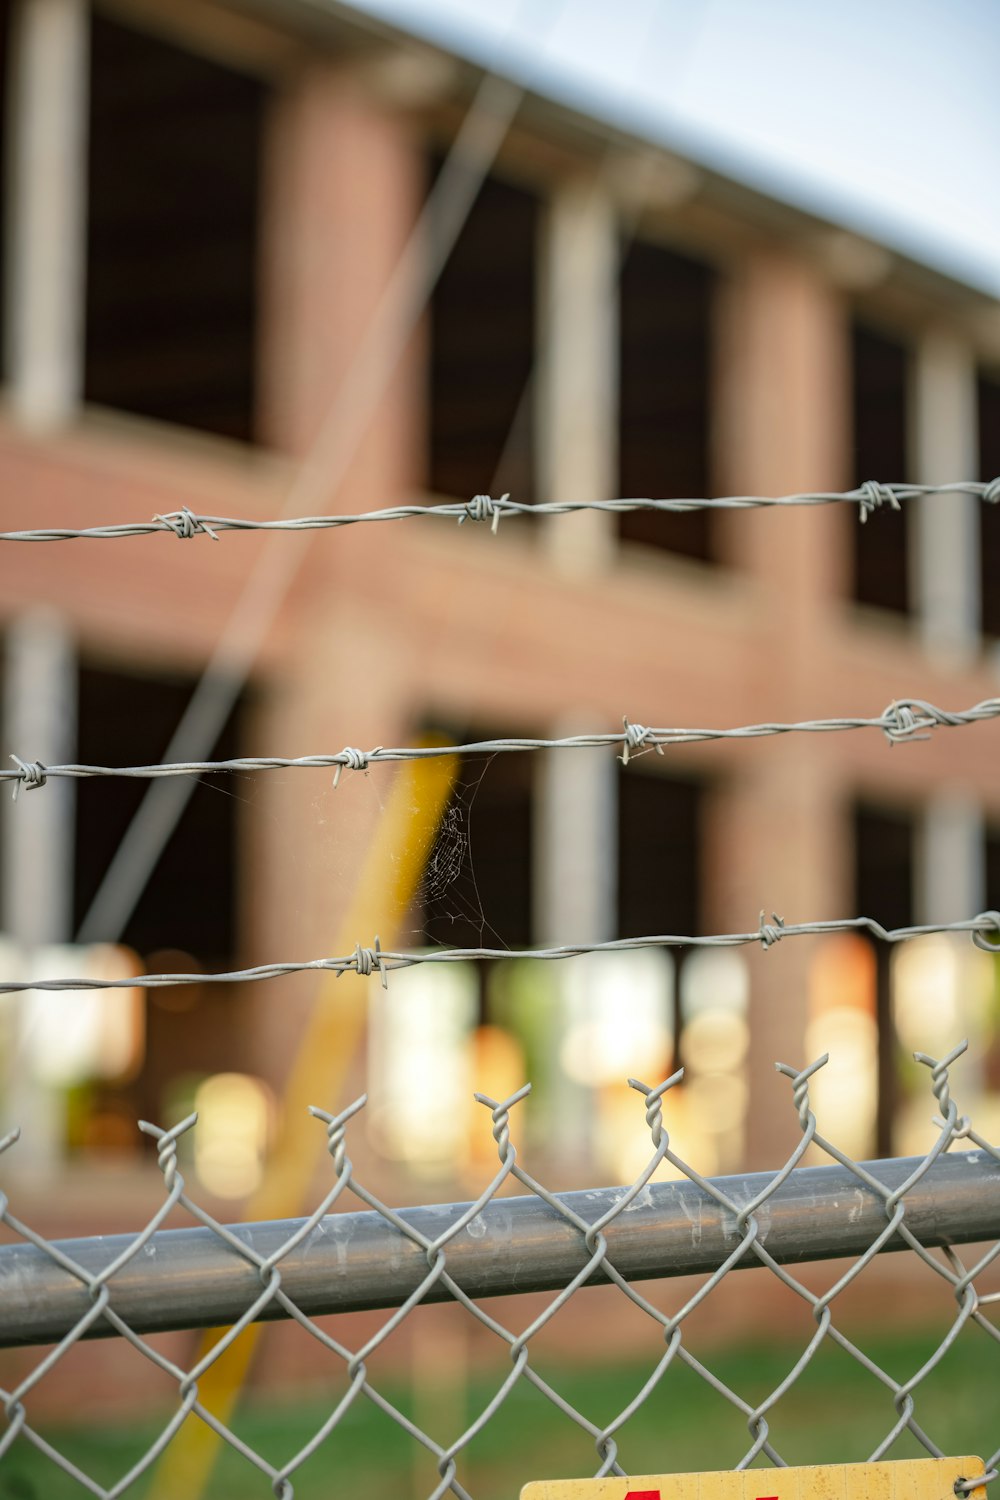 a close up of a chain link fence with a building in the background